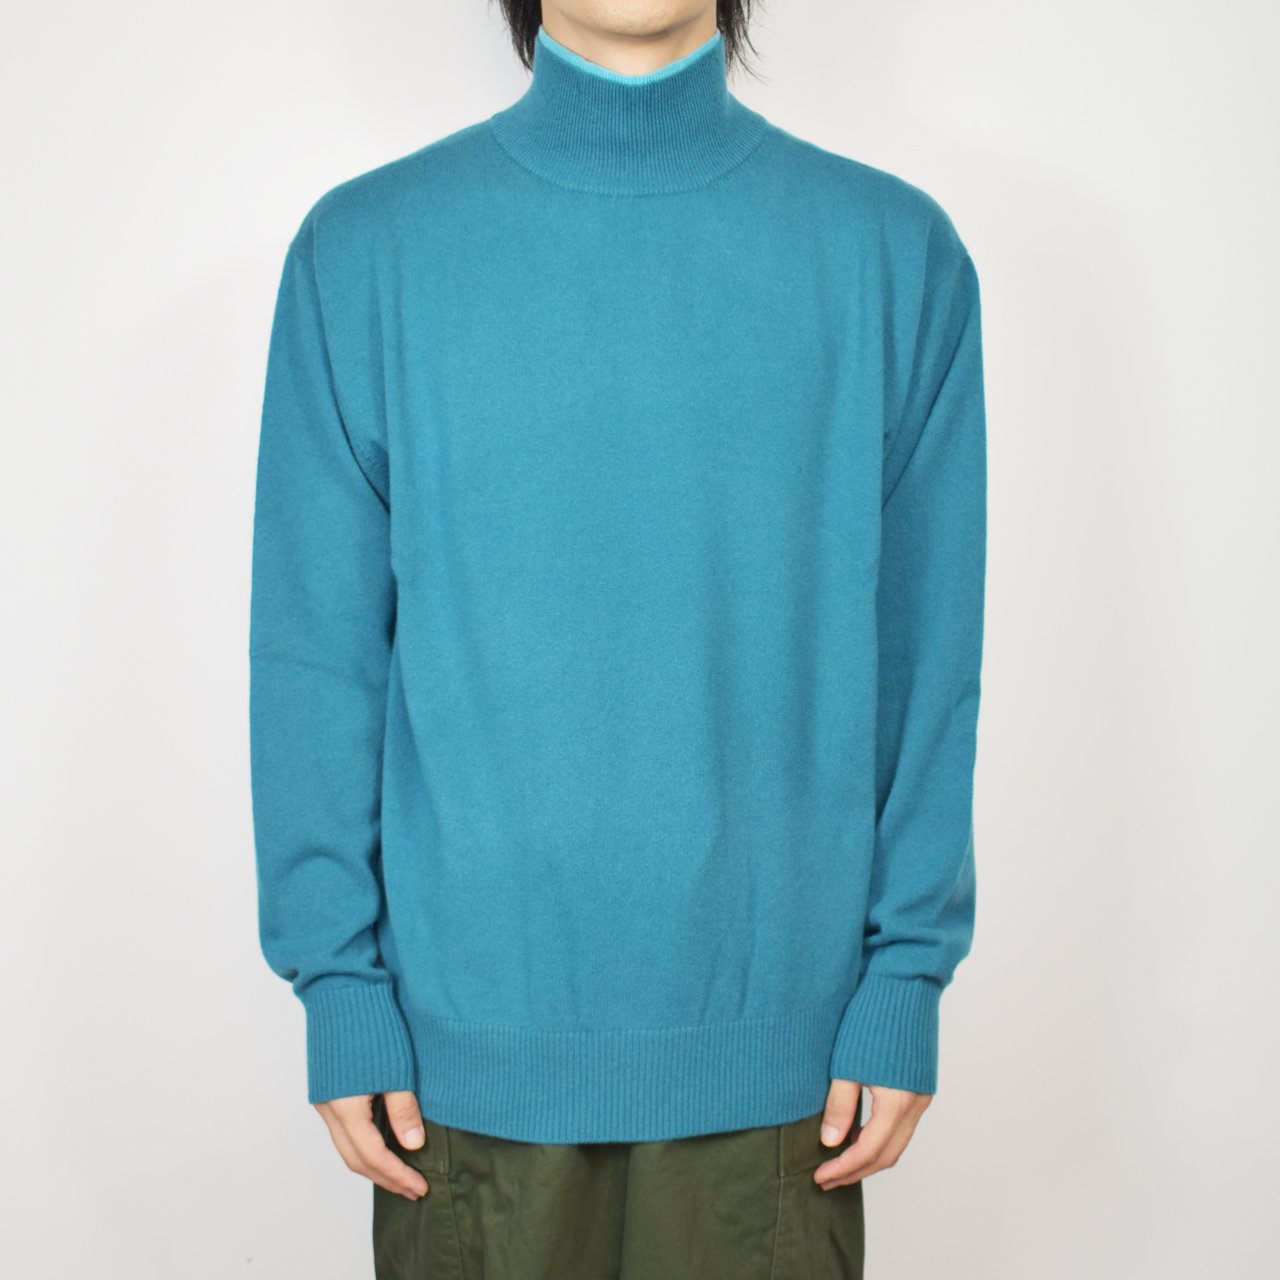 MARKAWARE (マーカウェア)｜CASHMERE DOUBLE TURTLE NECK BLUE 正規